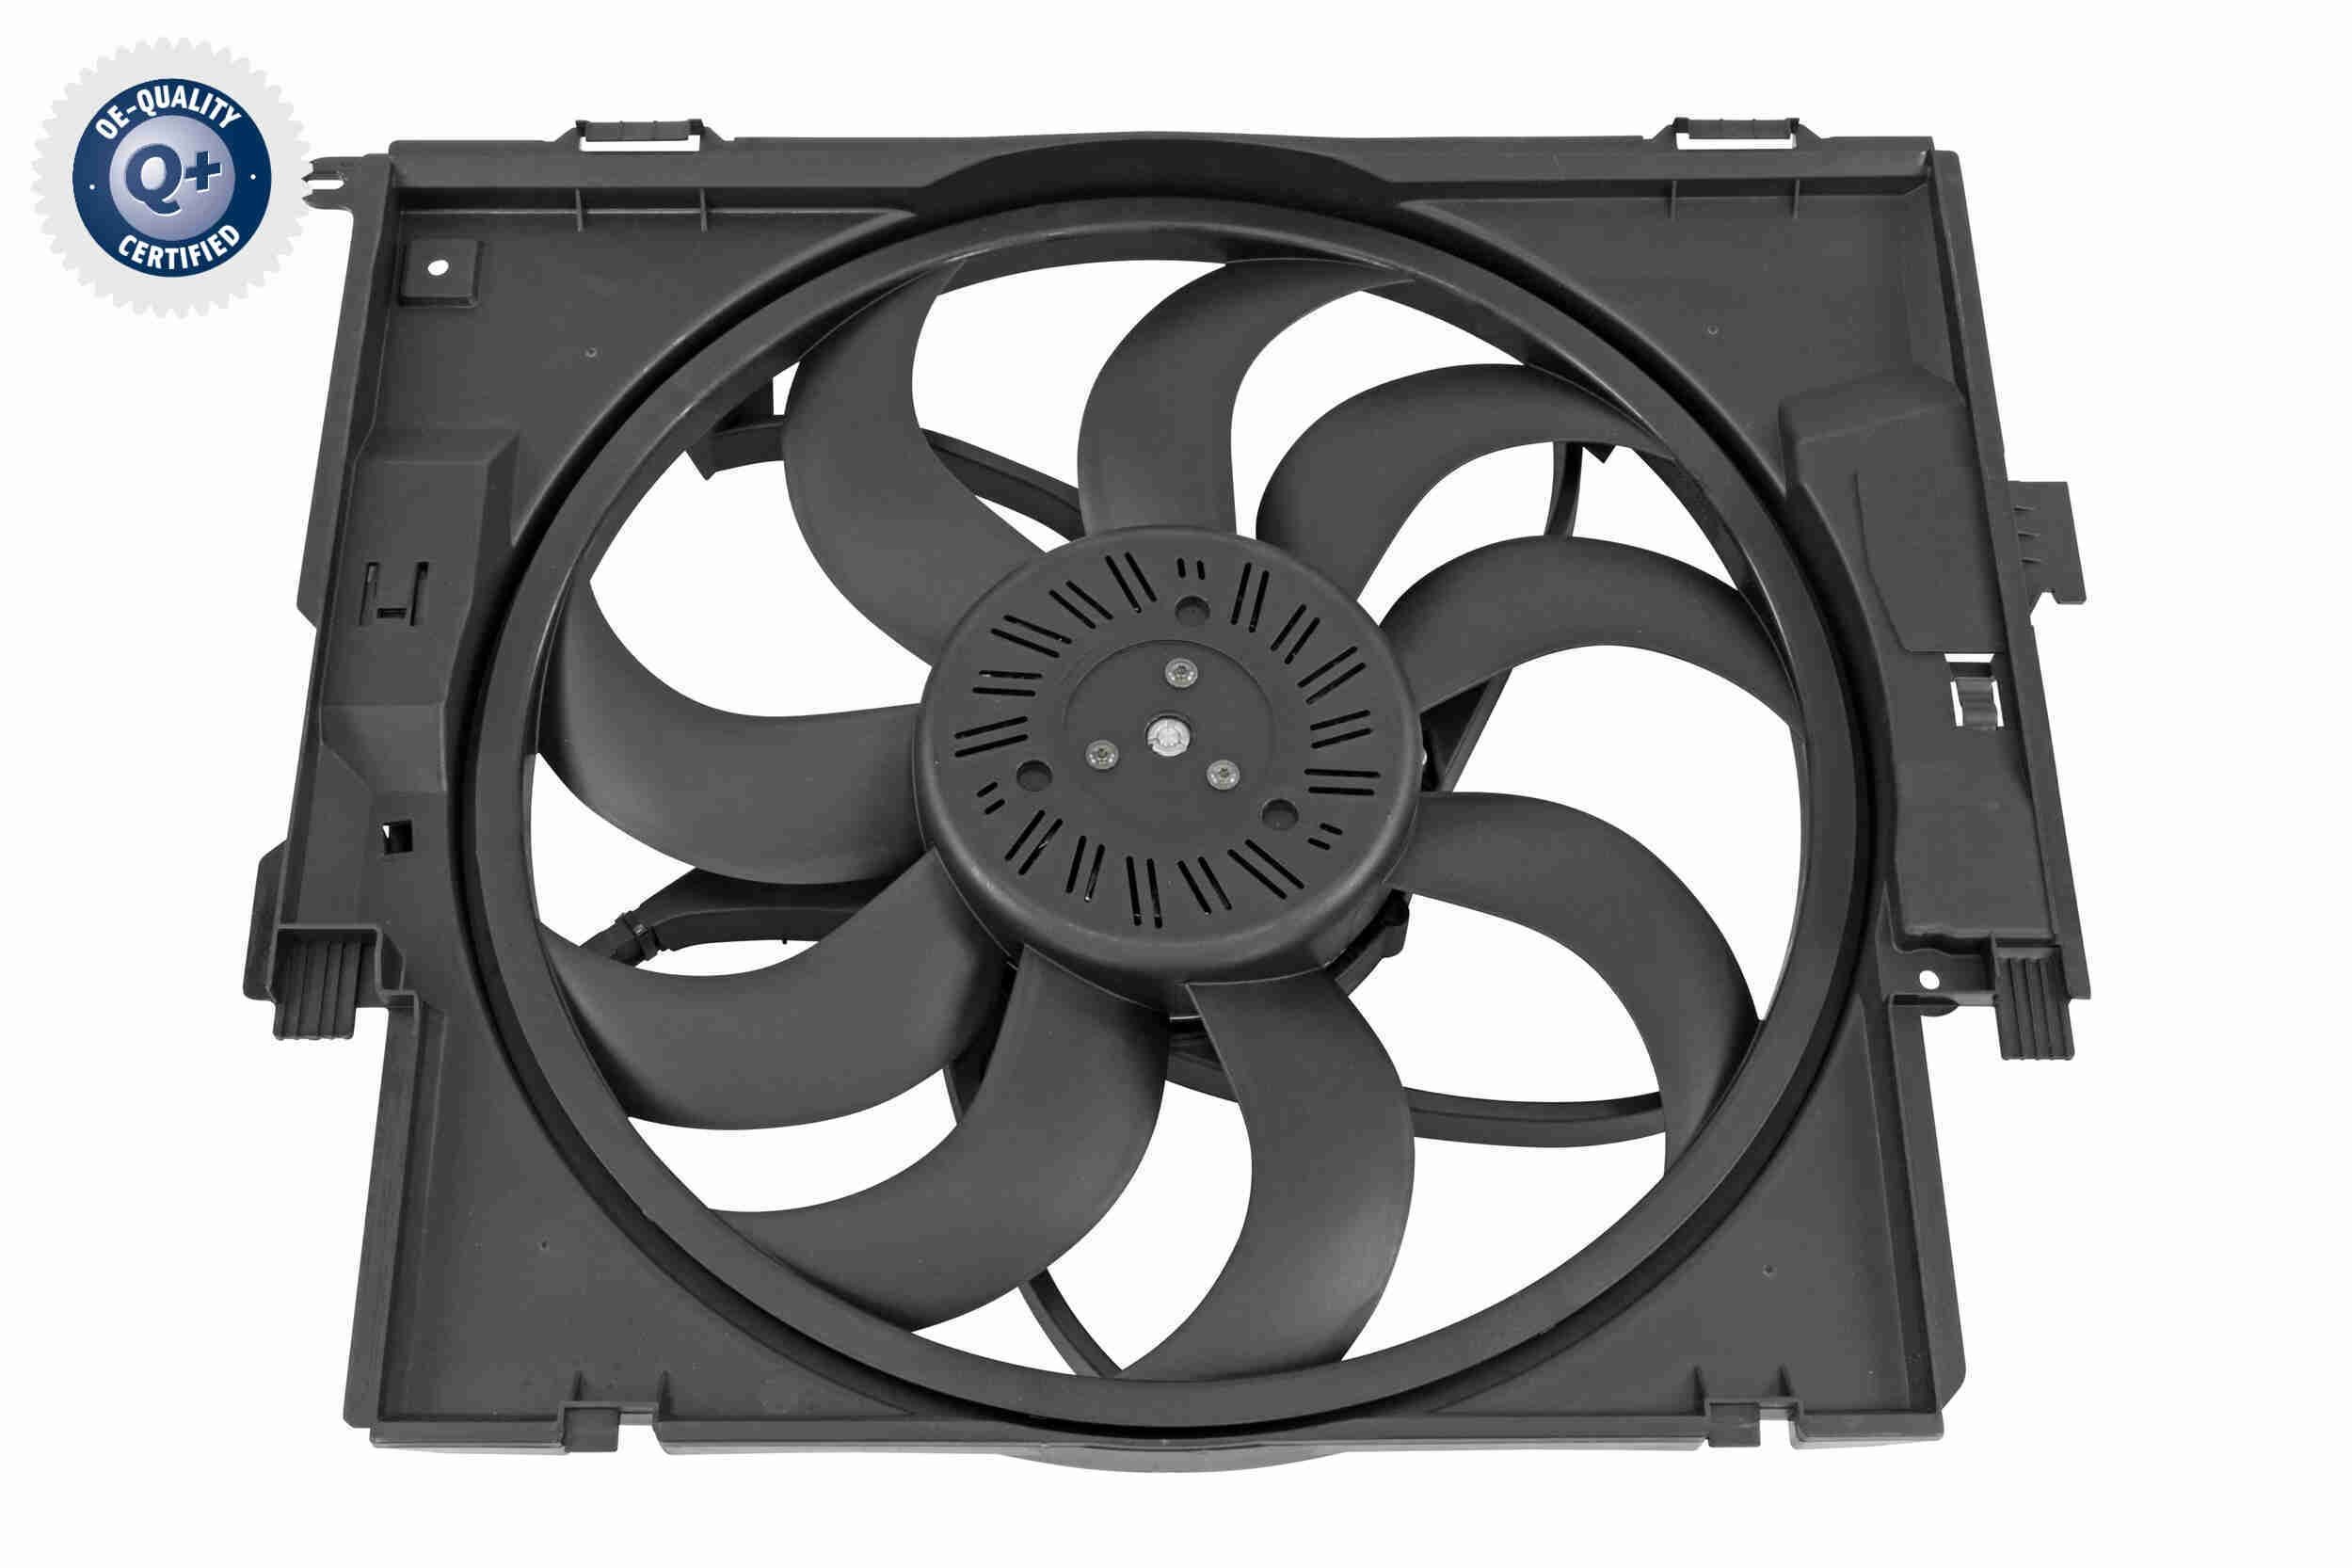 VEMO V20-01-0021 Fan, radiator for vehicles without trailer hitch, 400, 300W, with radiator fan shroud, Q+, original equipment manufacturer quality